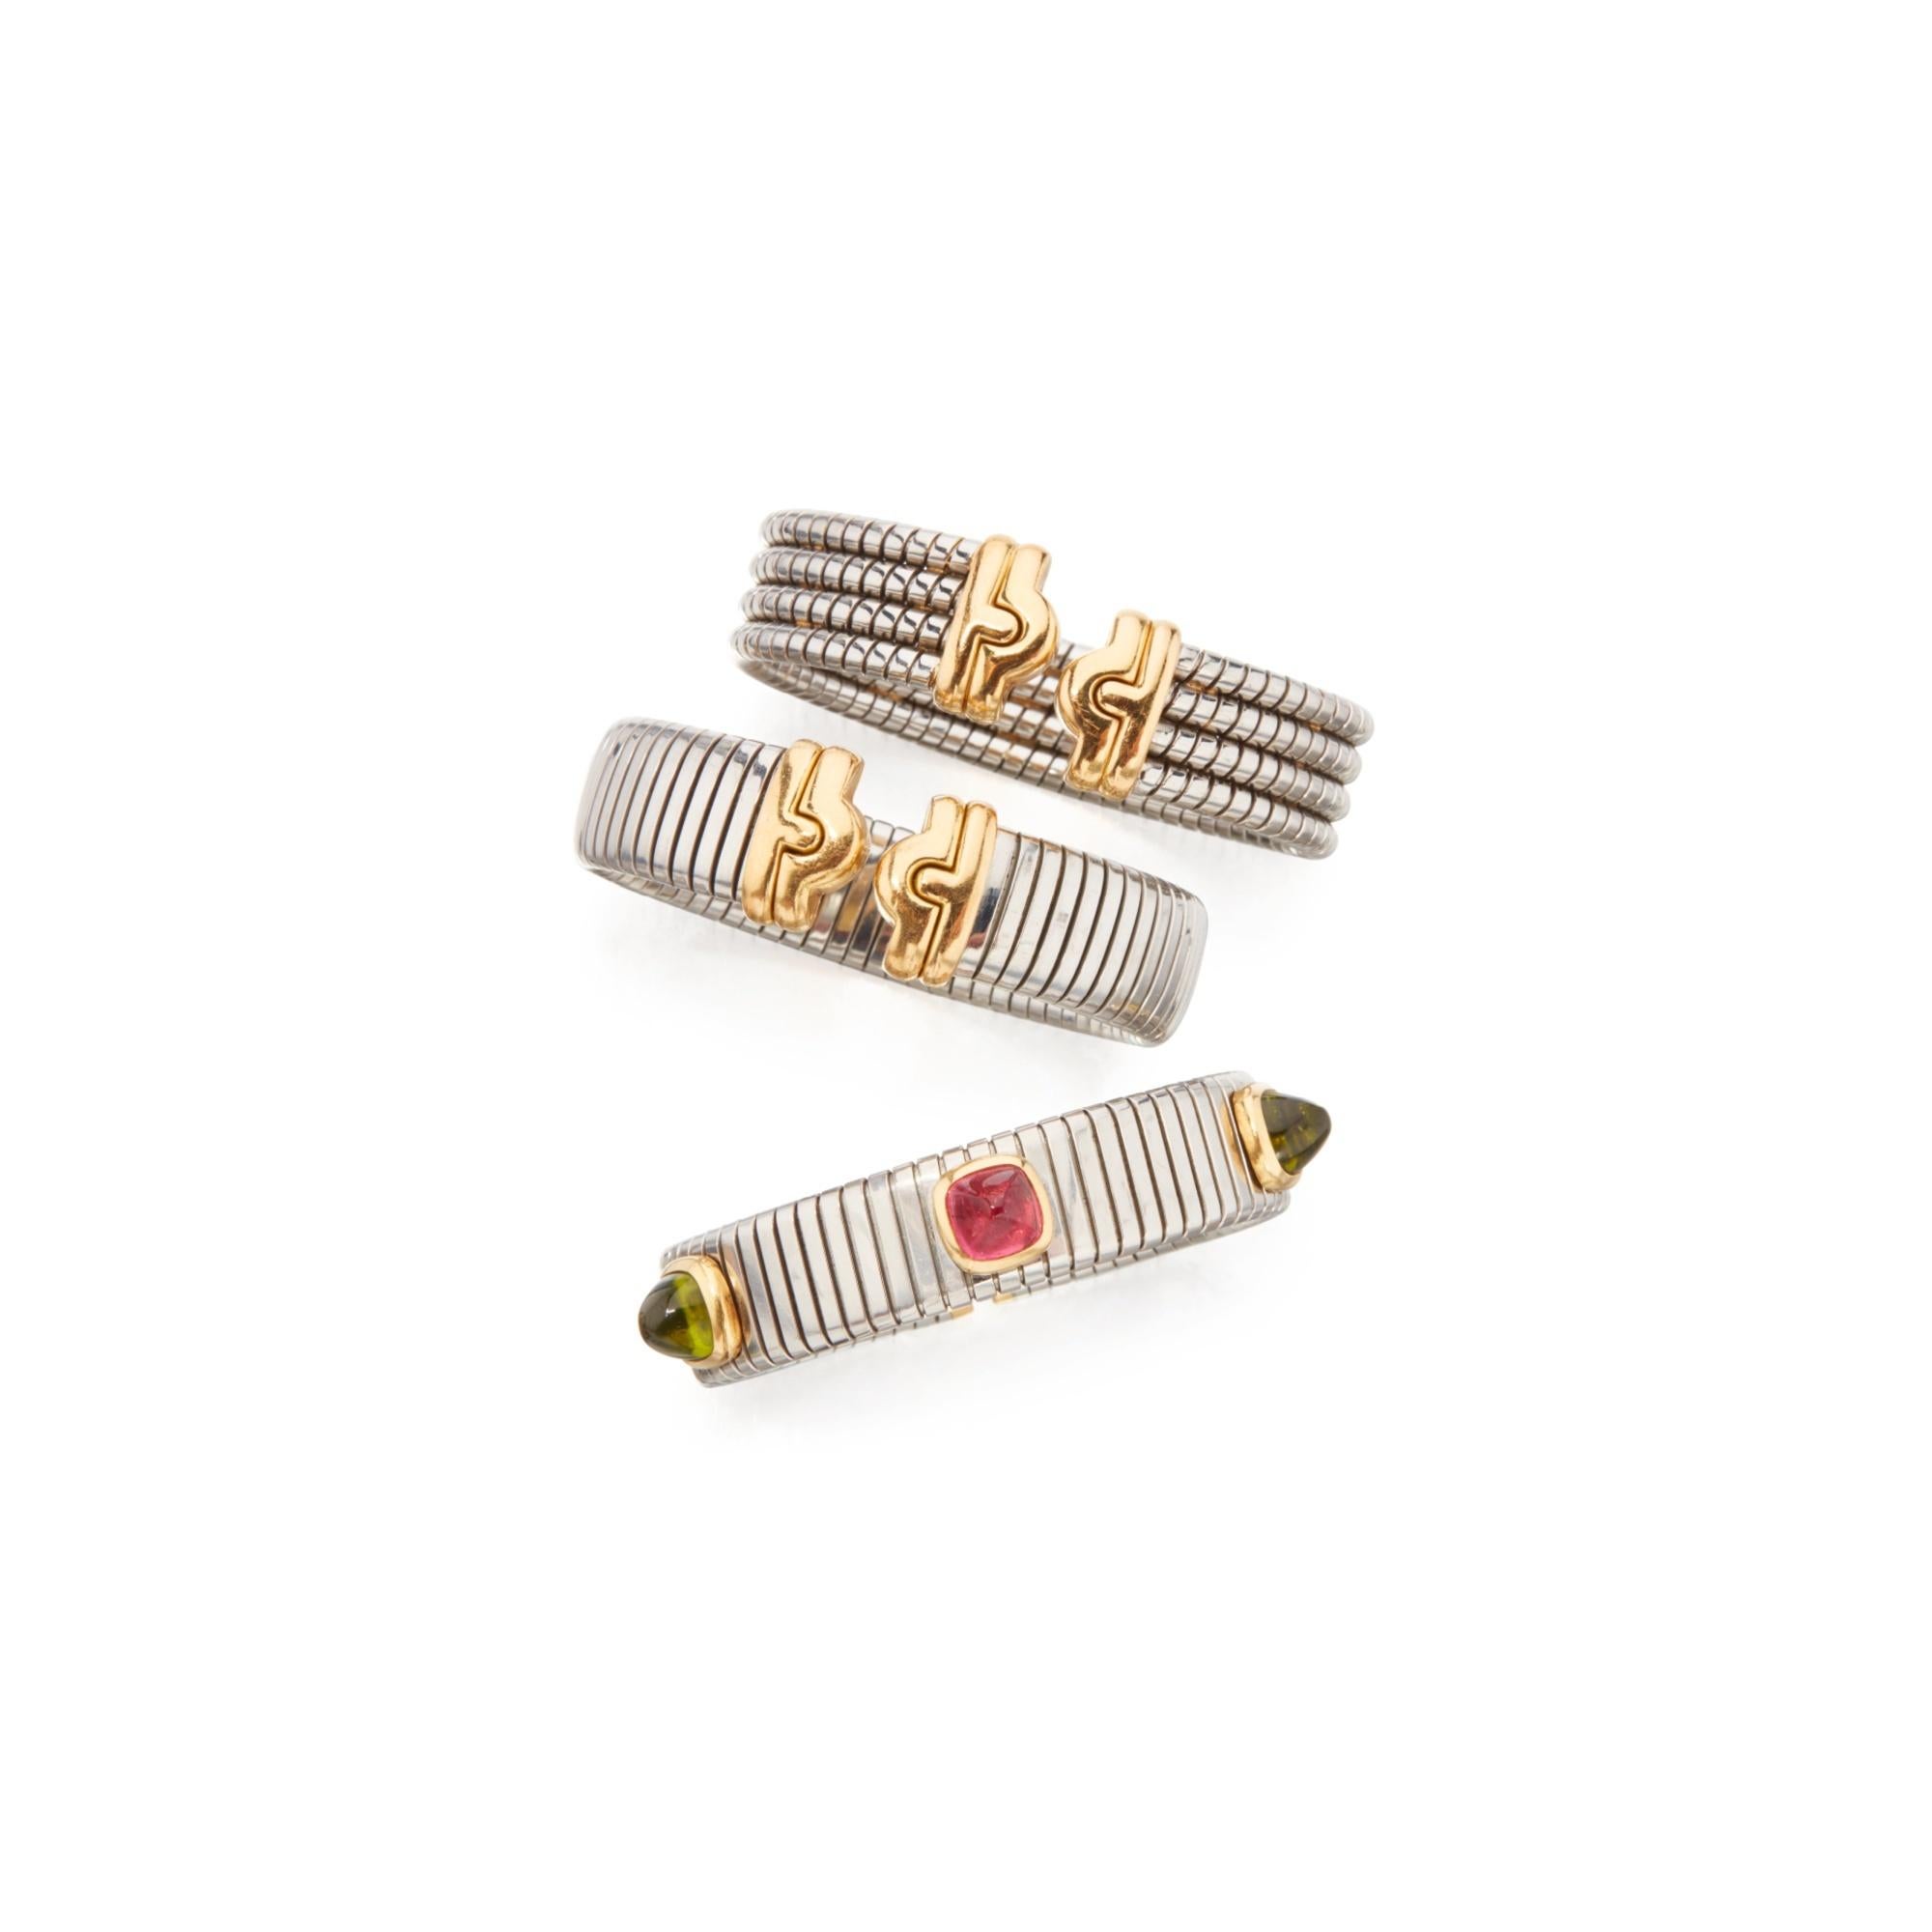 Three Steel and Gold ‘Tubogas’ Bracelets by Bulgari
Each of sprung design, two with decorative gold terminals, one with the inscription and a third featuring a pink tourmaline sugarloaf cabochon and two similarly-cut peridots, internal circumference